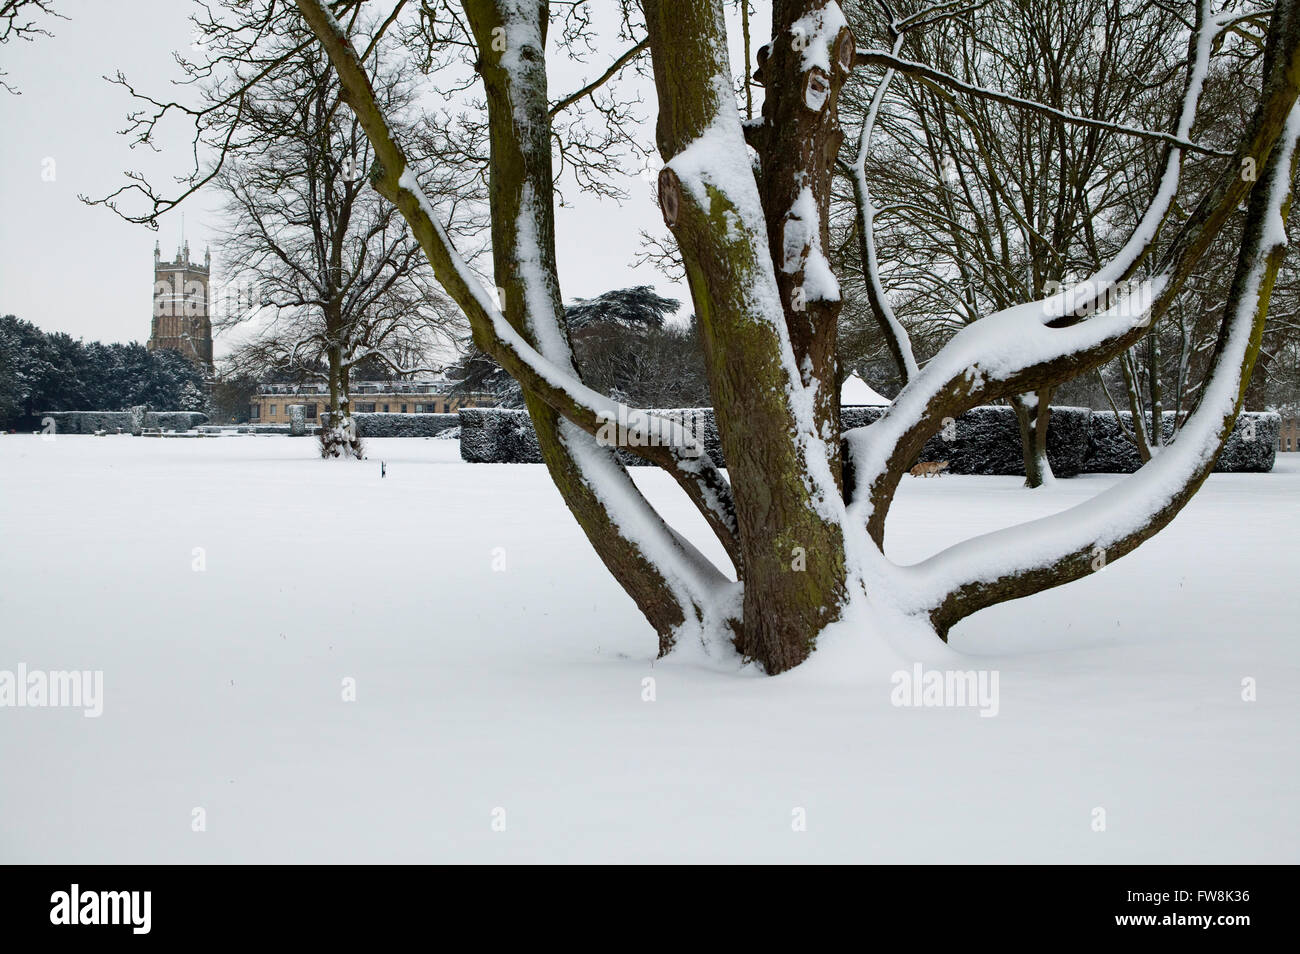 Trees in the Abbey grounds of the park in Cirencester, Gloucestershire, UkKcovered in a thick layer of winter snow, creating an almost abstract shape adn form of patterns as the branches are at times hidden behind the snbow that has clung to the upright trees. Stock Photo